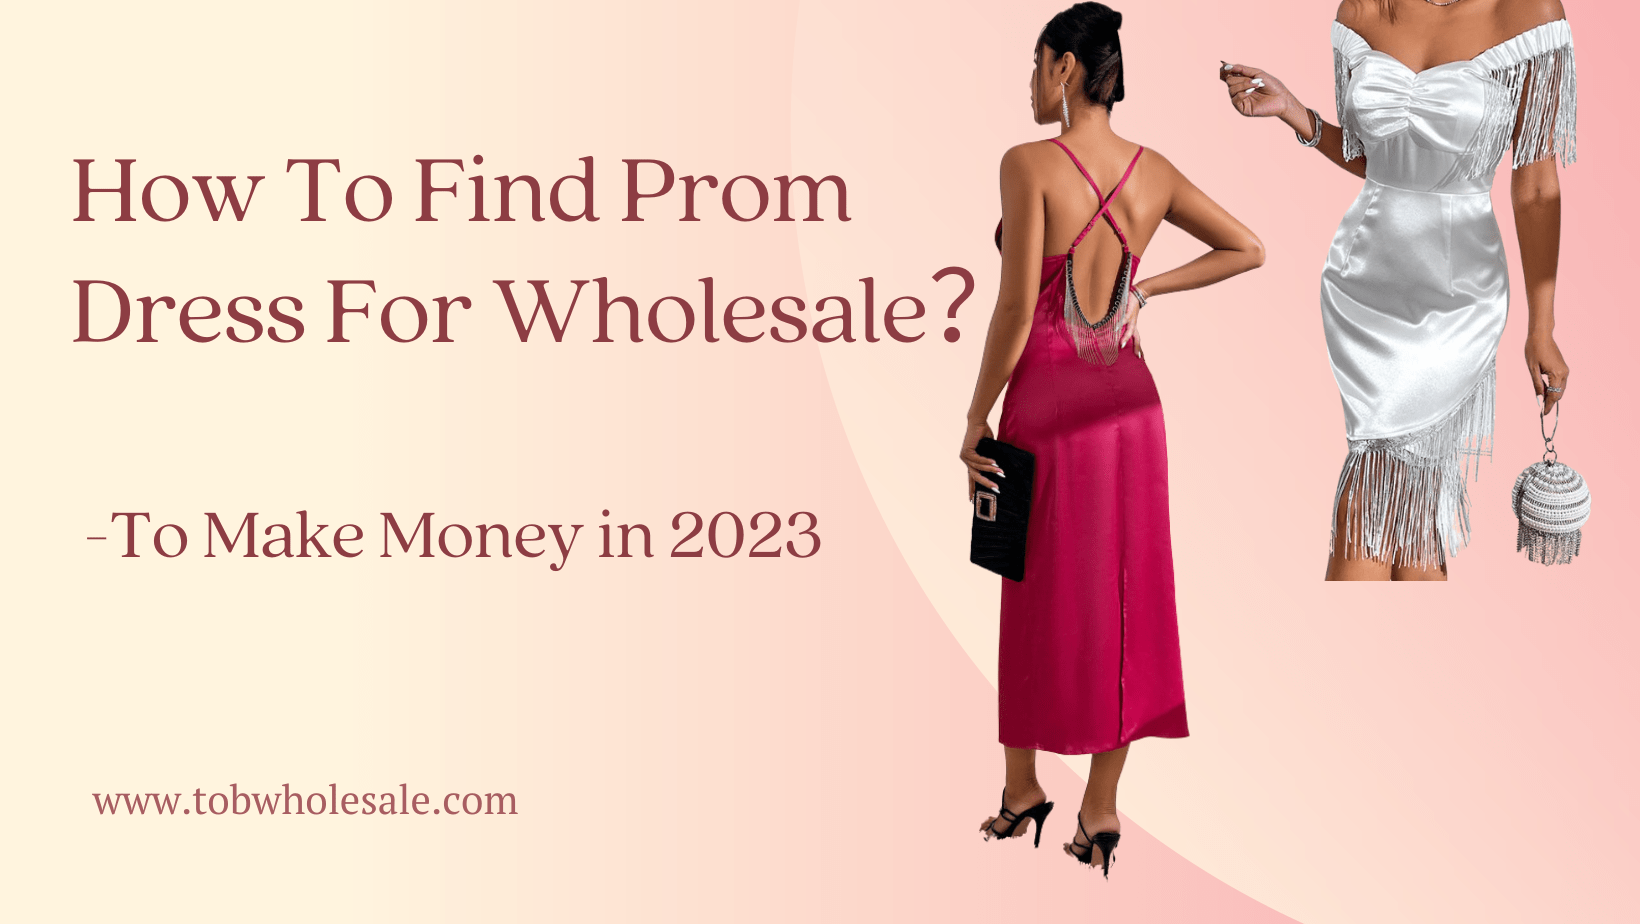 How to Find Prom Dress for Wholesale